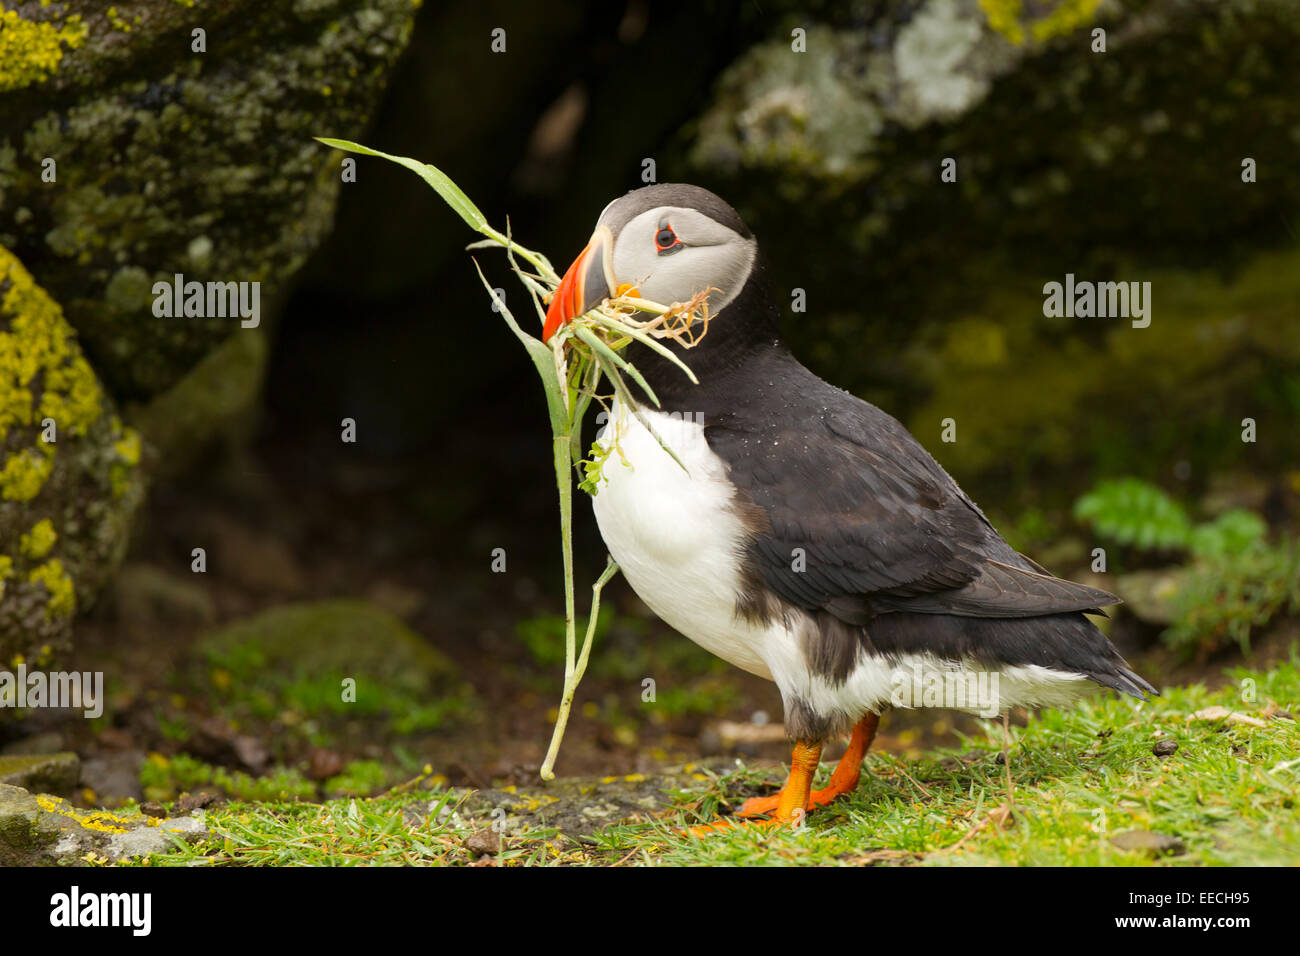 Puffin with nest material Stock Photo